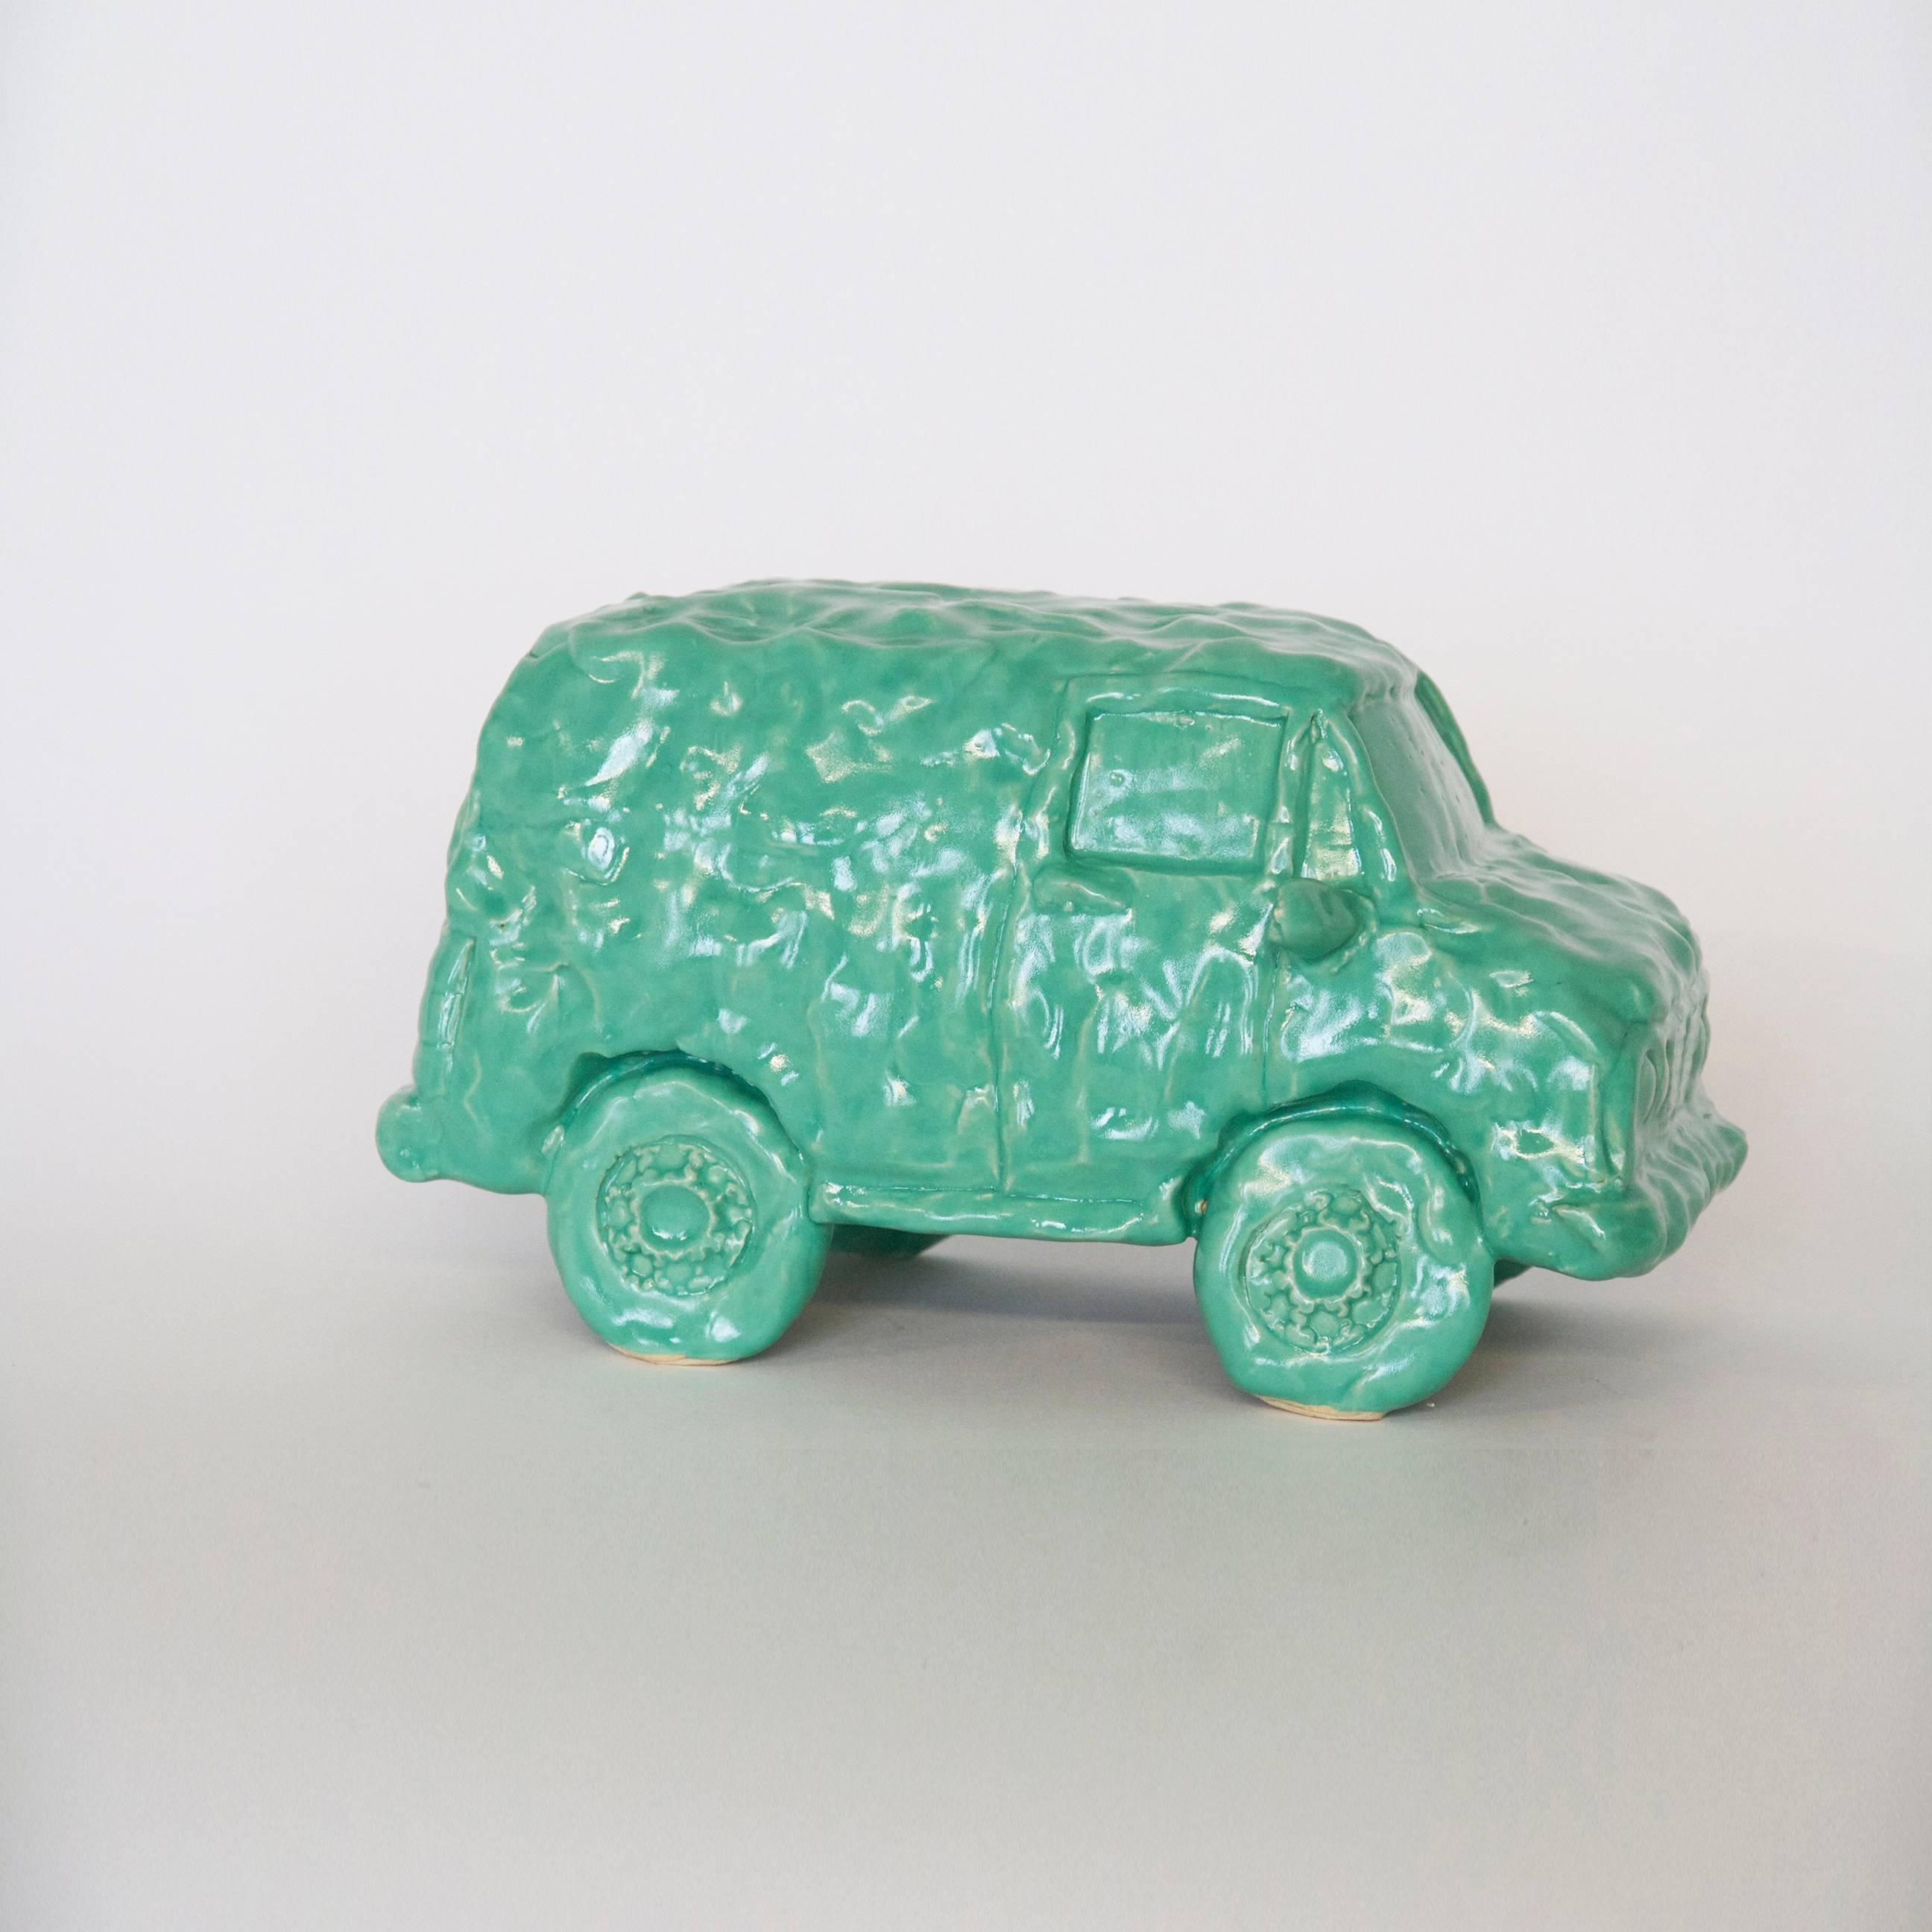 Keith Simpson has made these types of ceramic vehicles intermittently over the past years. He likes to make the underdog car models. Keith says, 